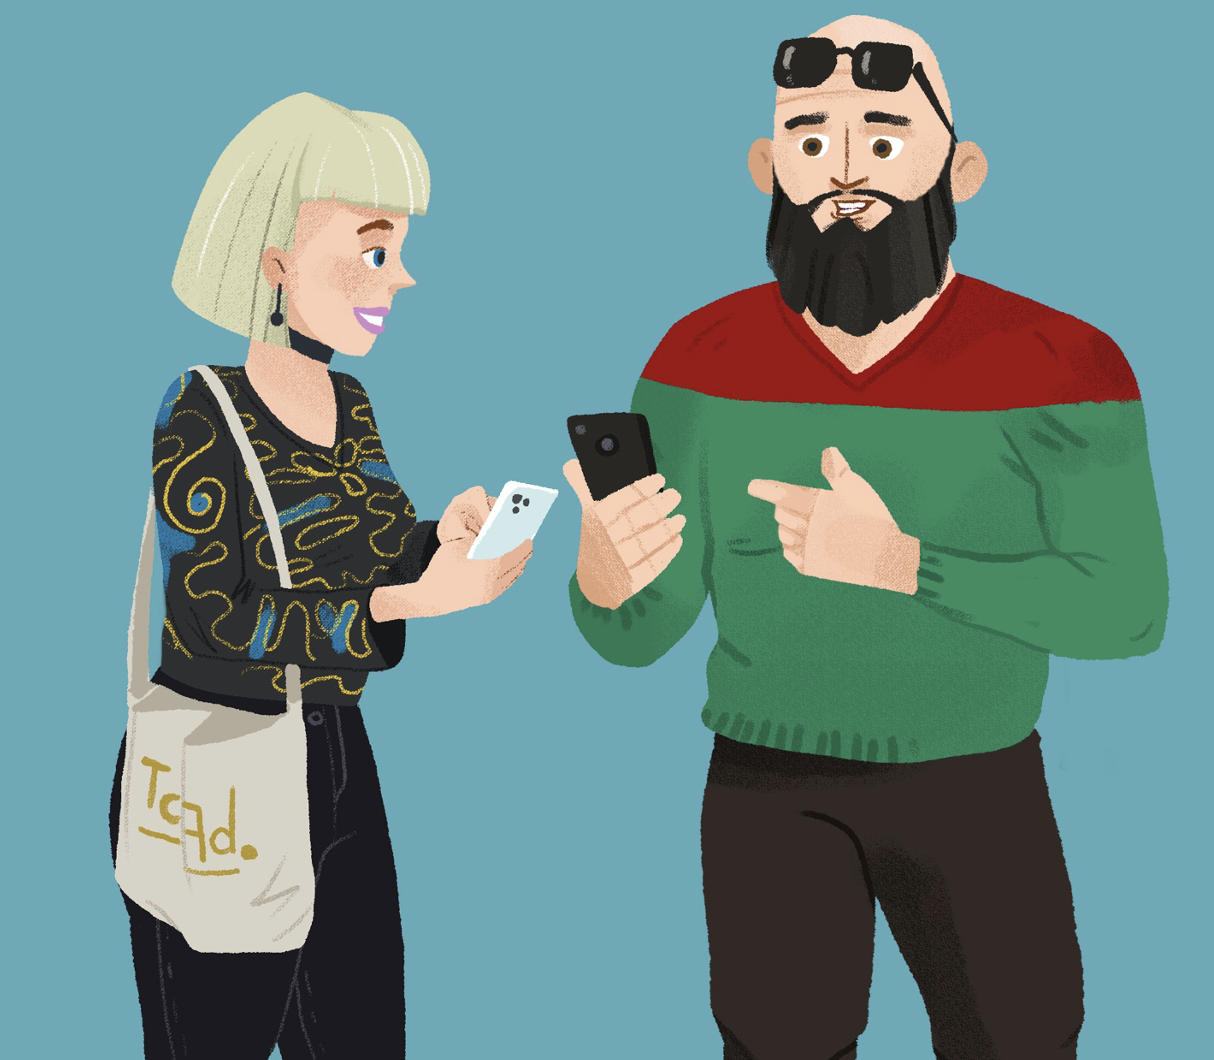 A woman with a purse and man meeting with beard and sunglasses propped up on his head are talking and pointing at the smart phones that they are holding in their hands.